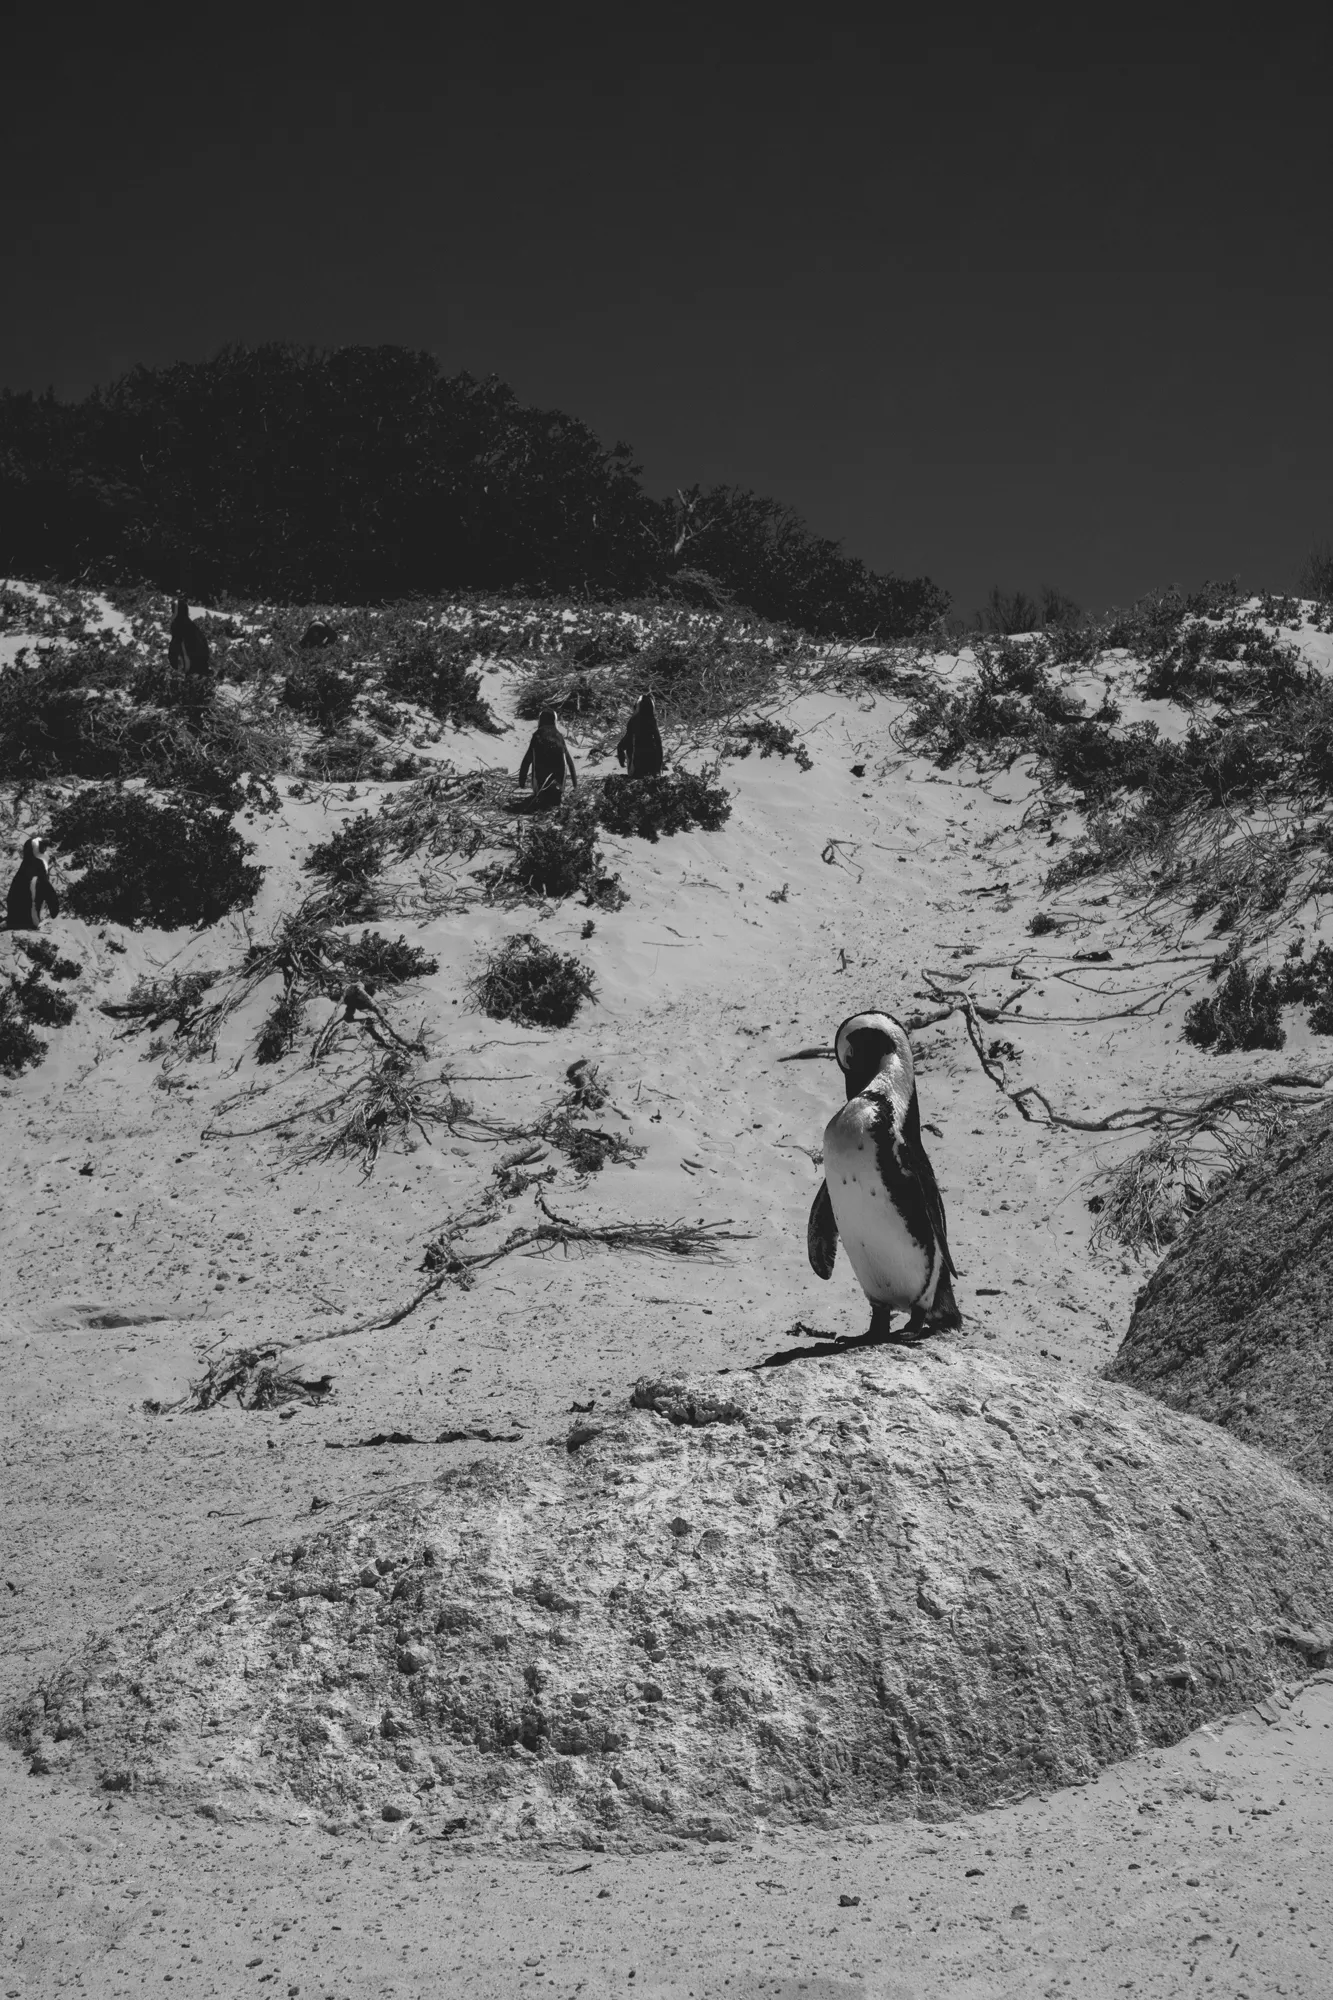 2022-02-14 - Cape Town - Penguin standing on rock on beach